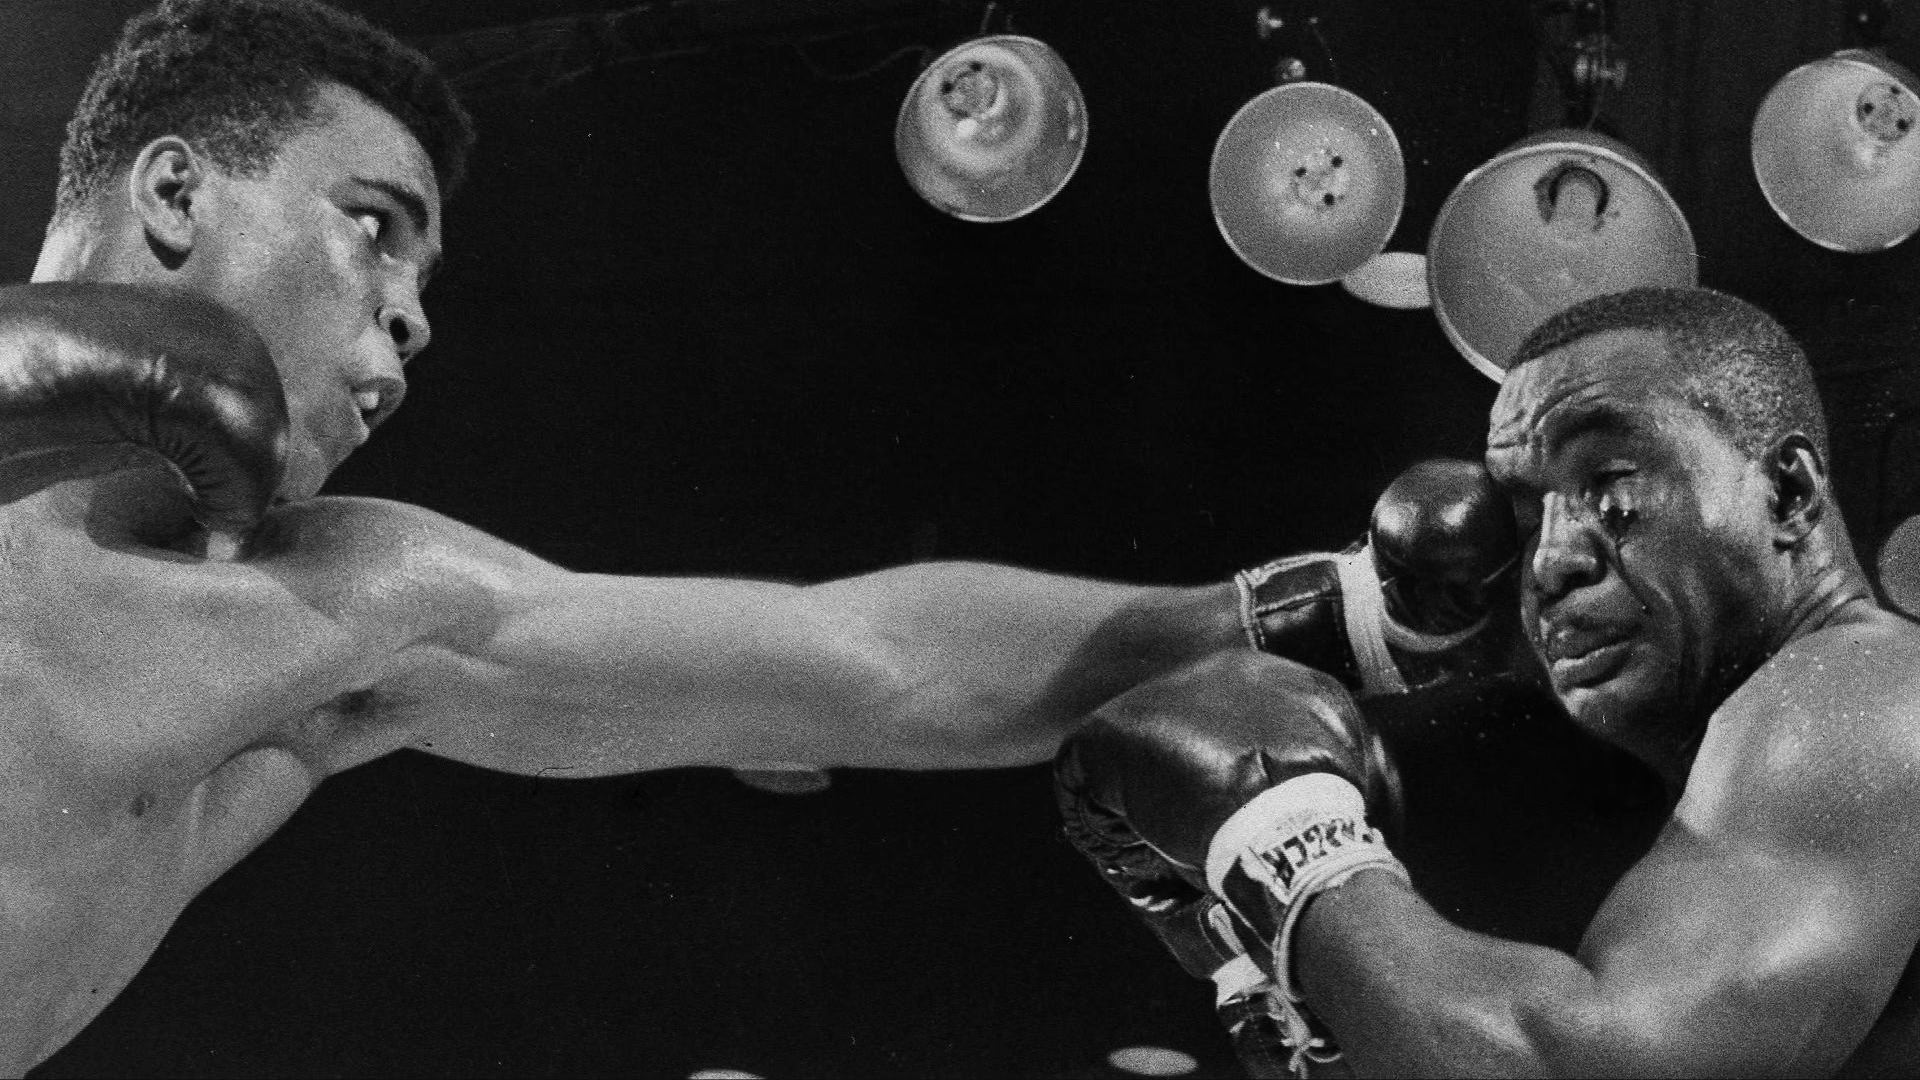 Remembering the fight that made Muhammad Ali, 50 years later - CBS News